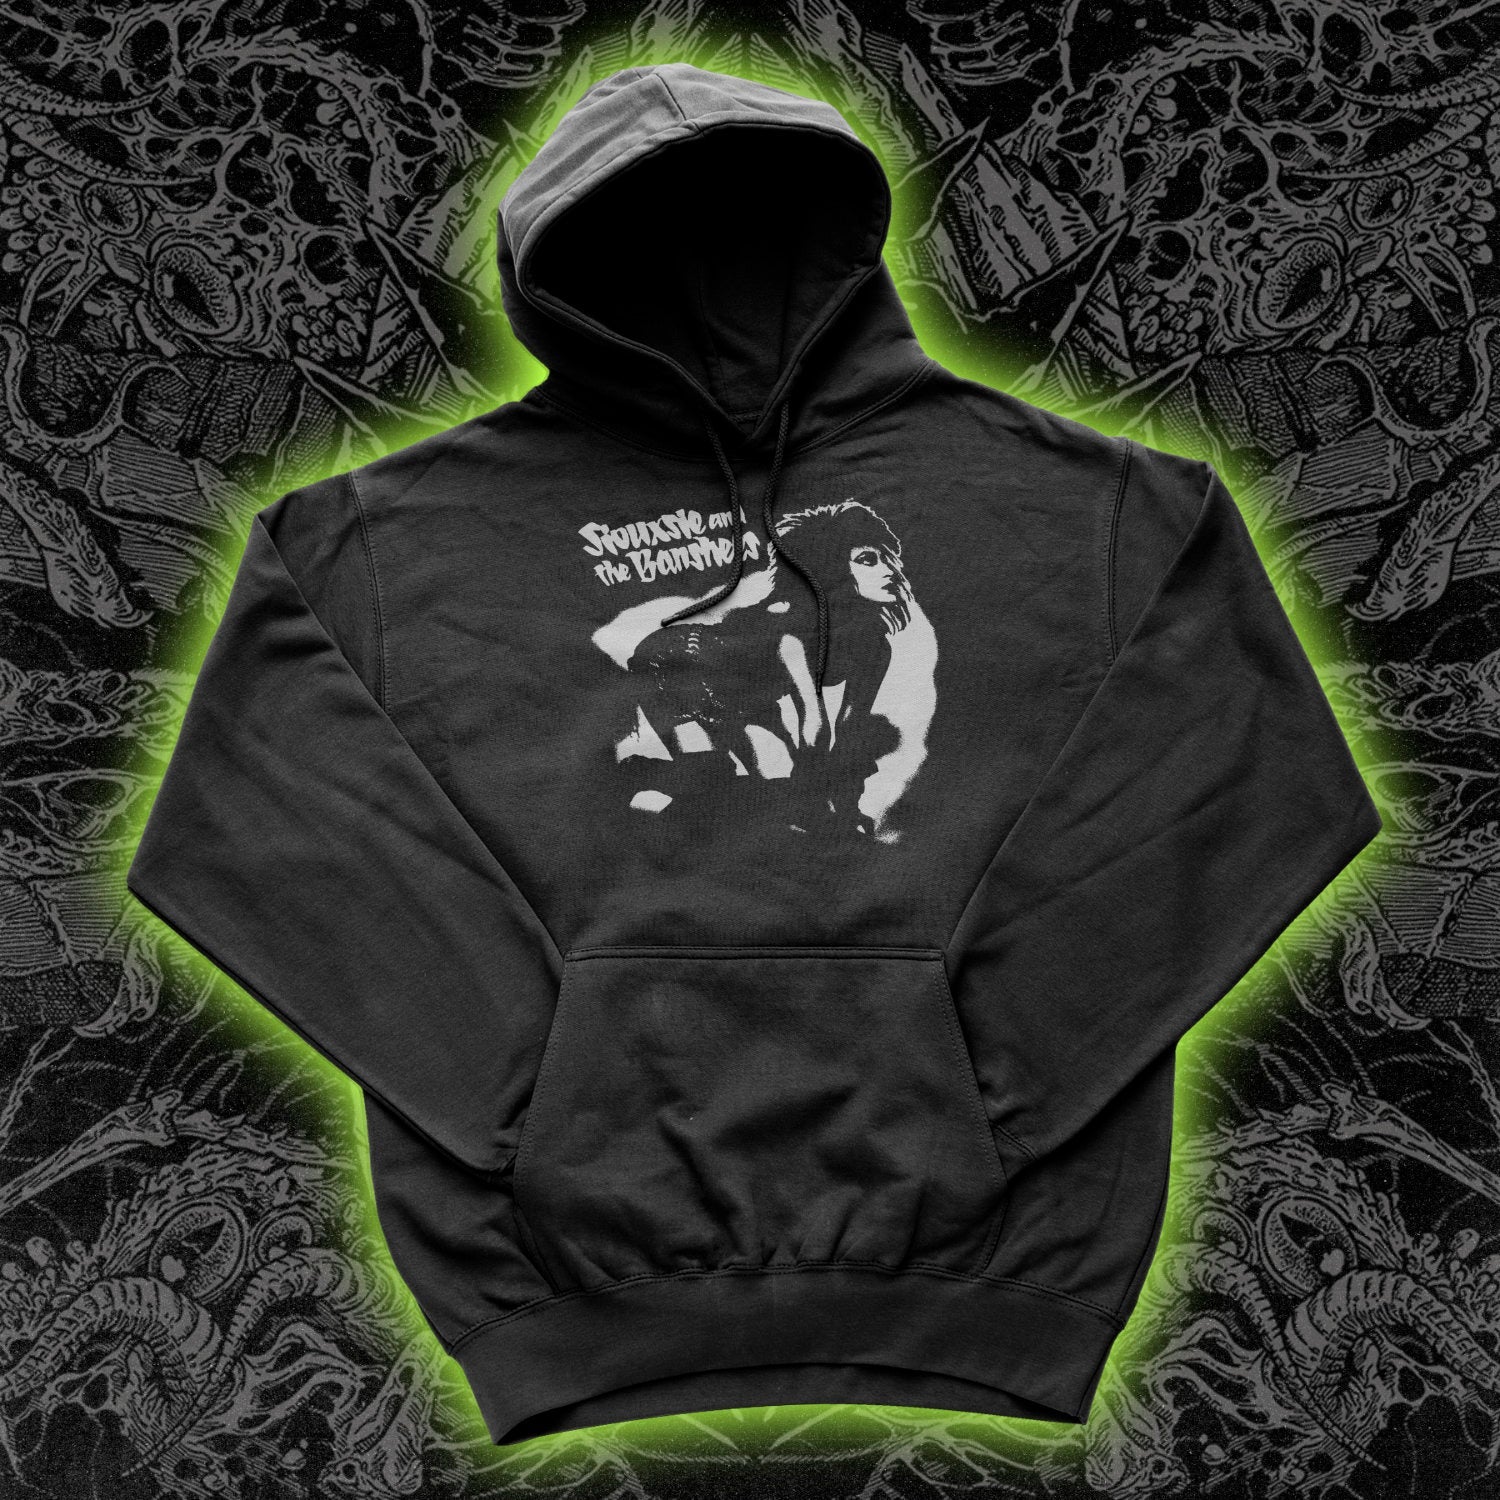 Siouxsie And The Banshees Hoodie